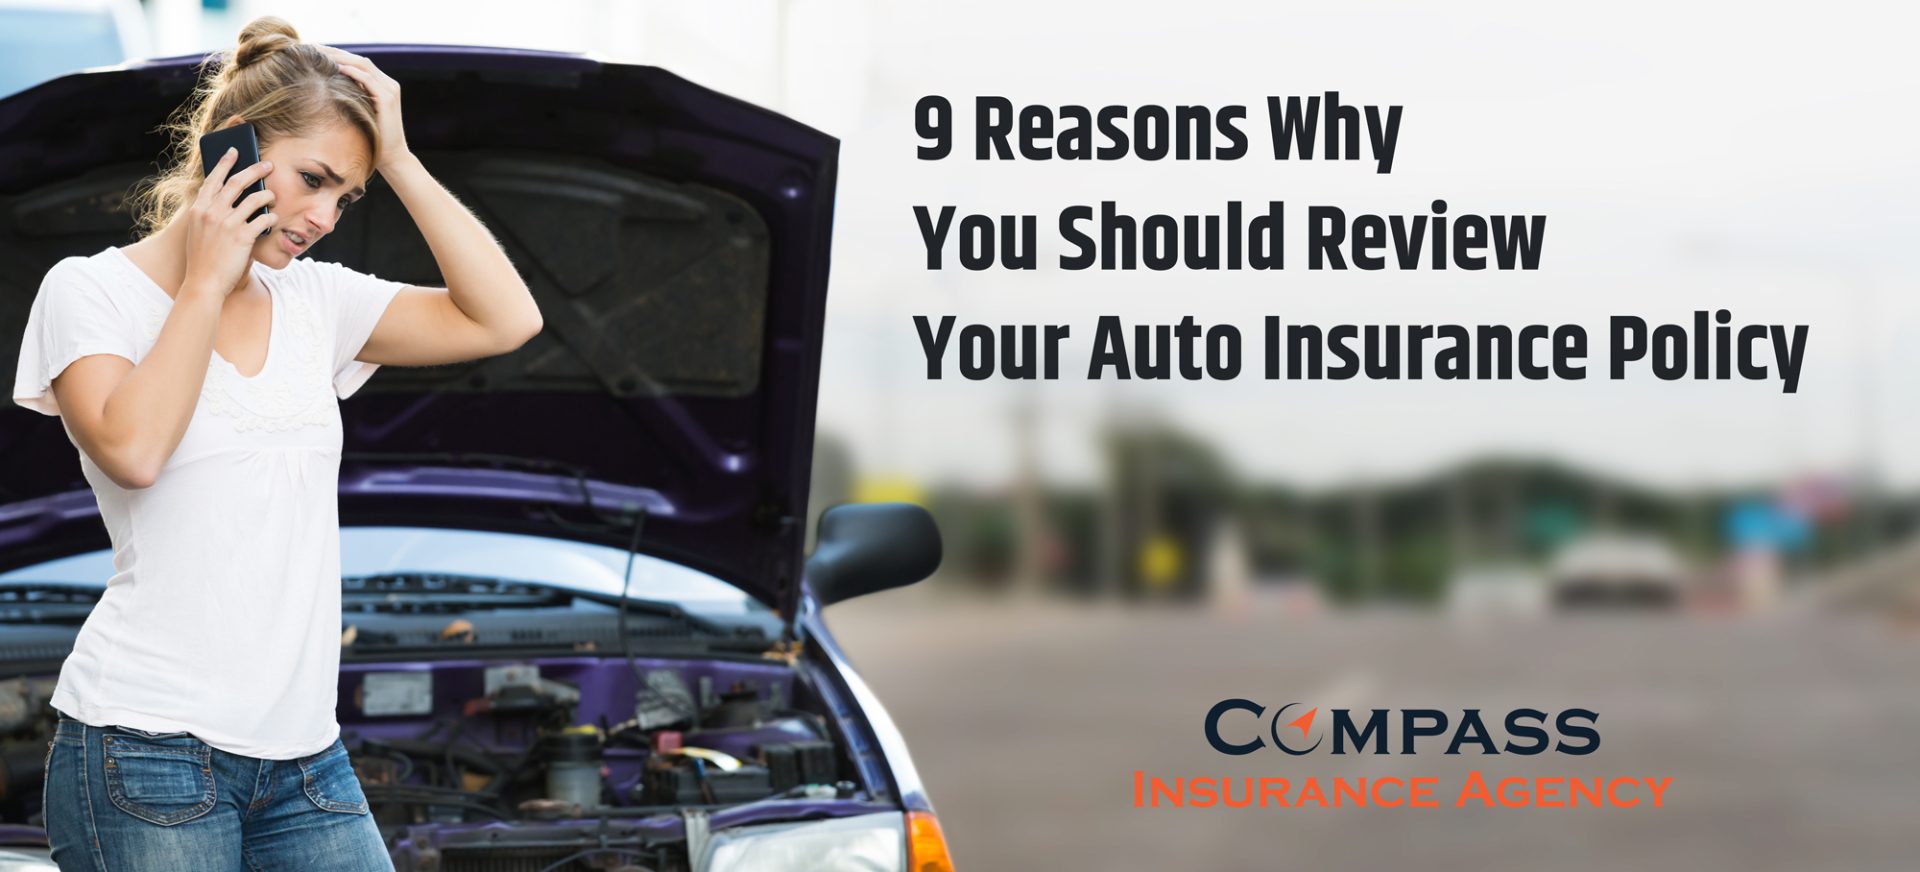 9 Reasons Why You Should Review Your Auto Insurance Policy